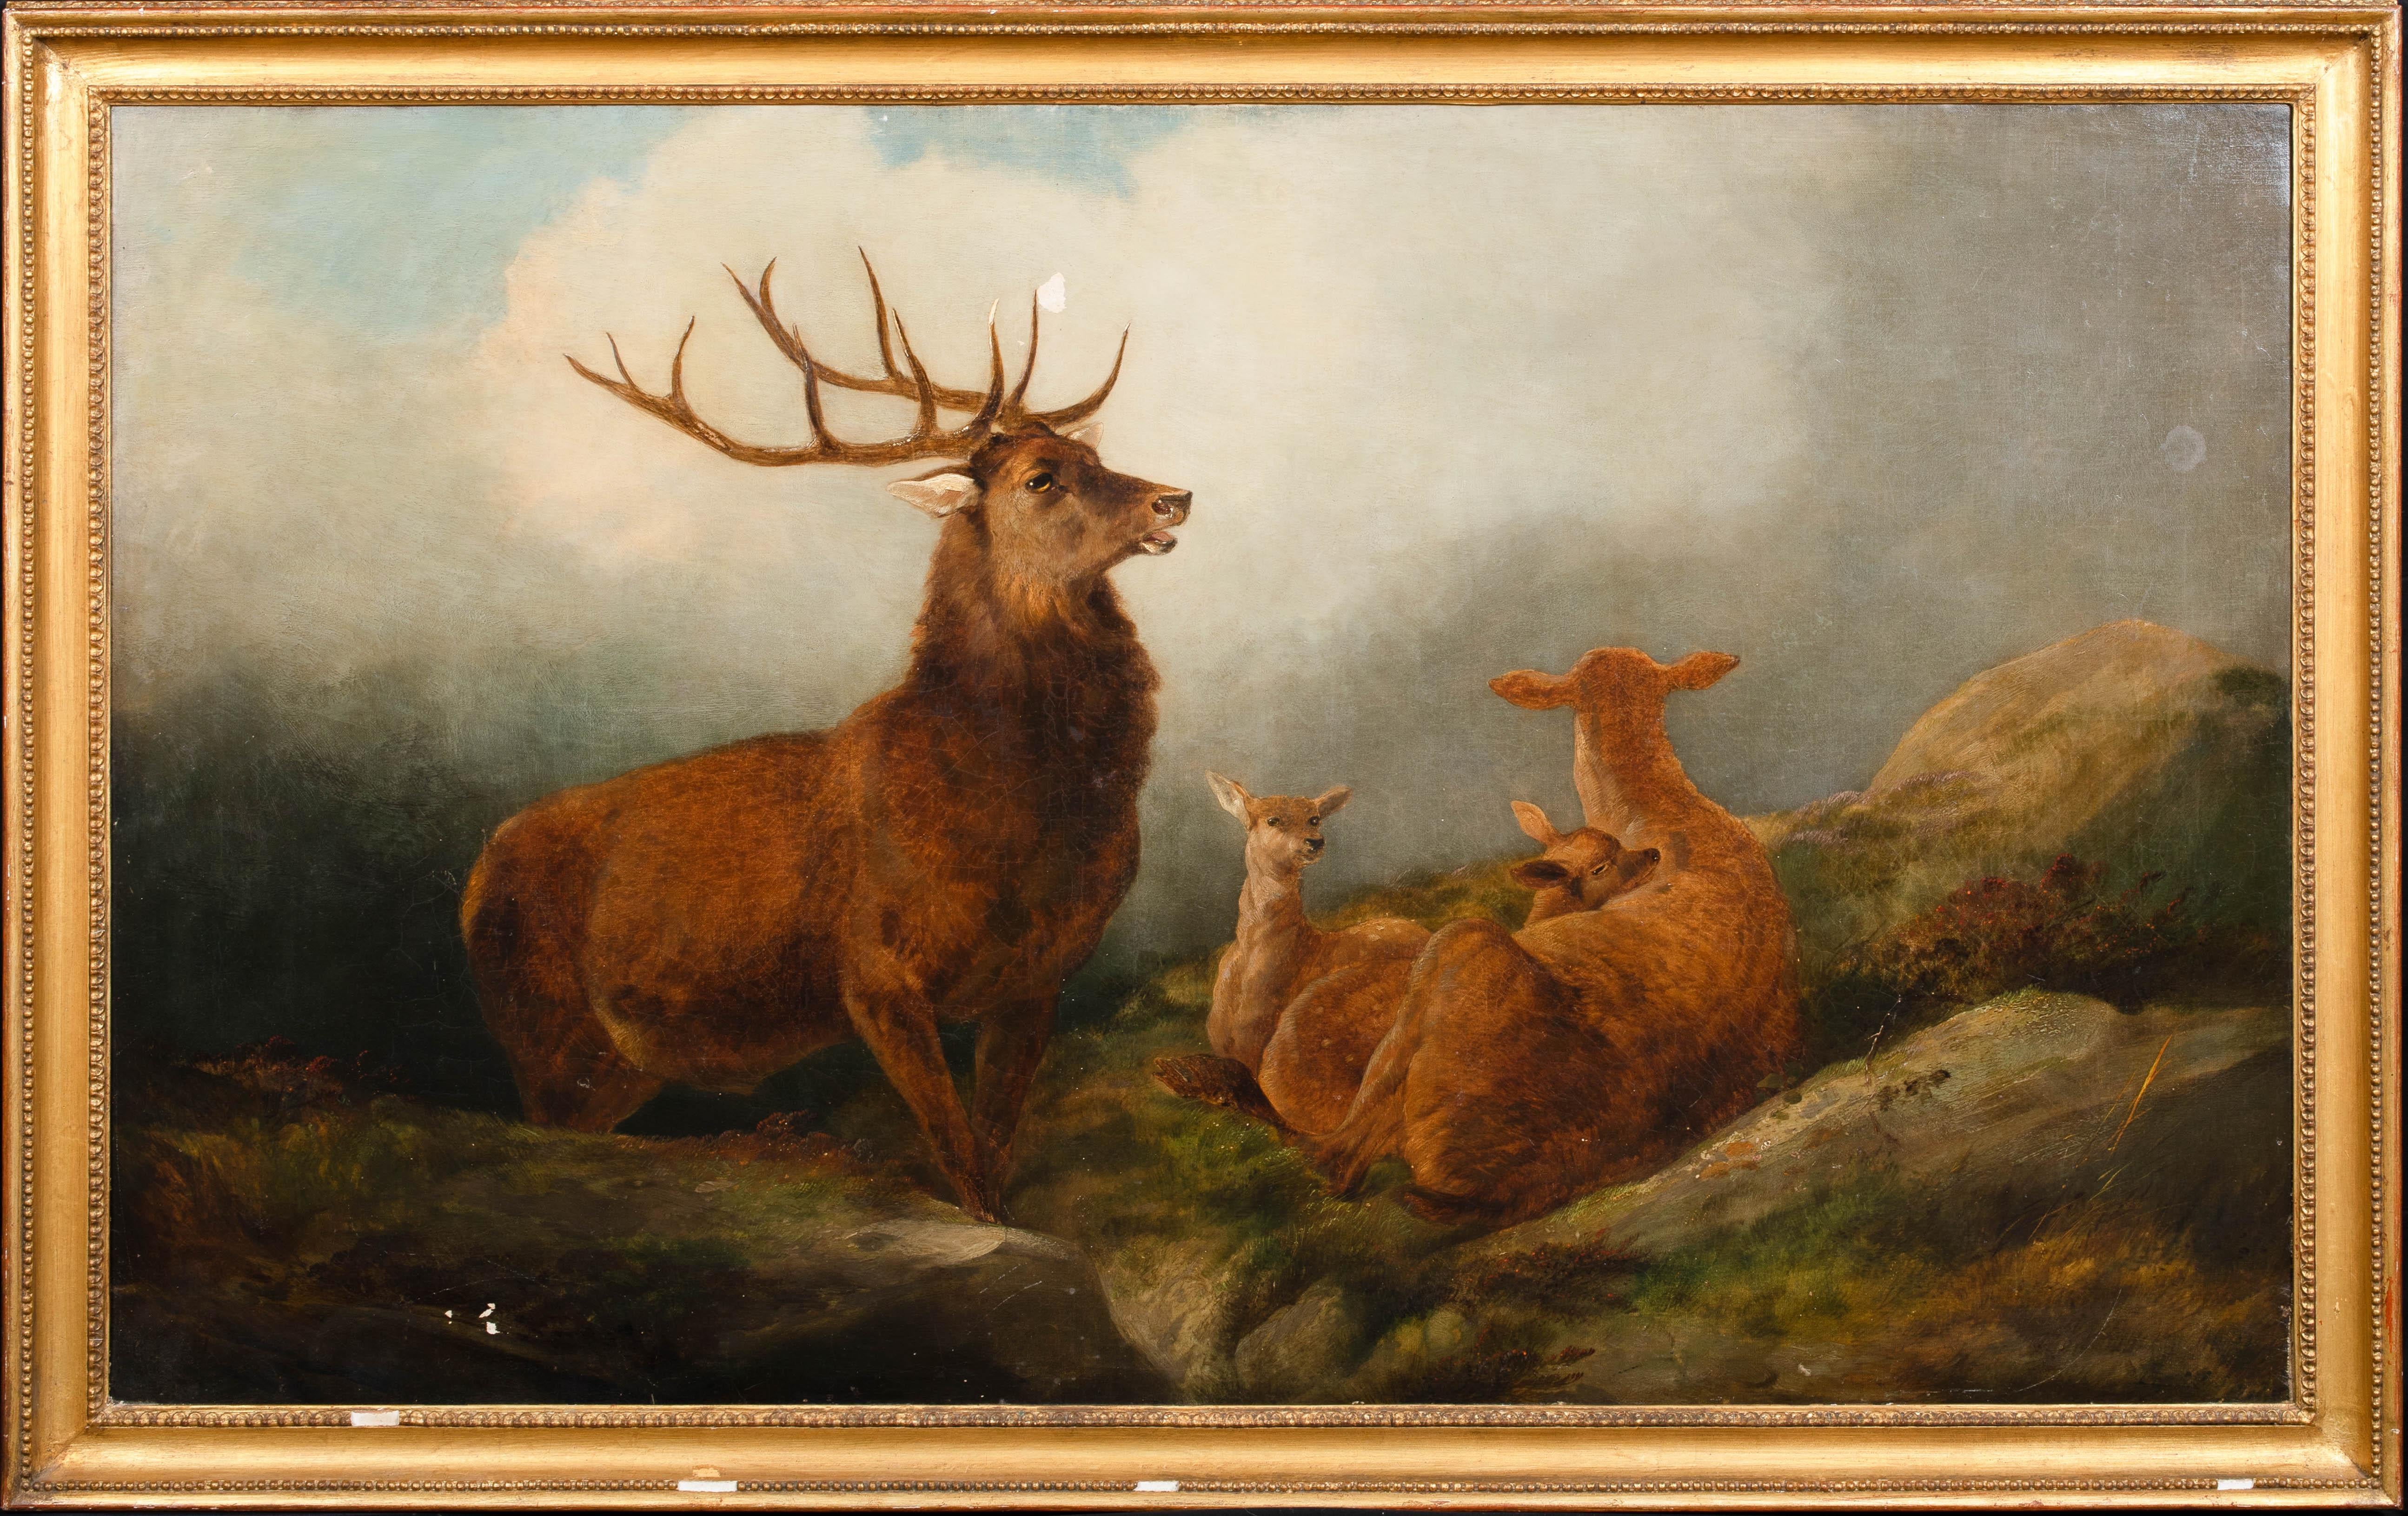 Unknown Landscape Painting - The Monarch Of The Glen, 19th Century Scottish Highland Stag